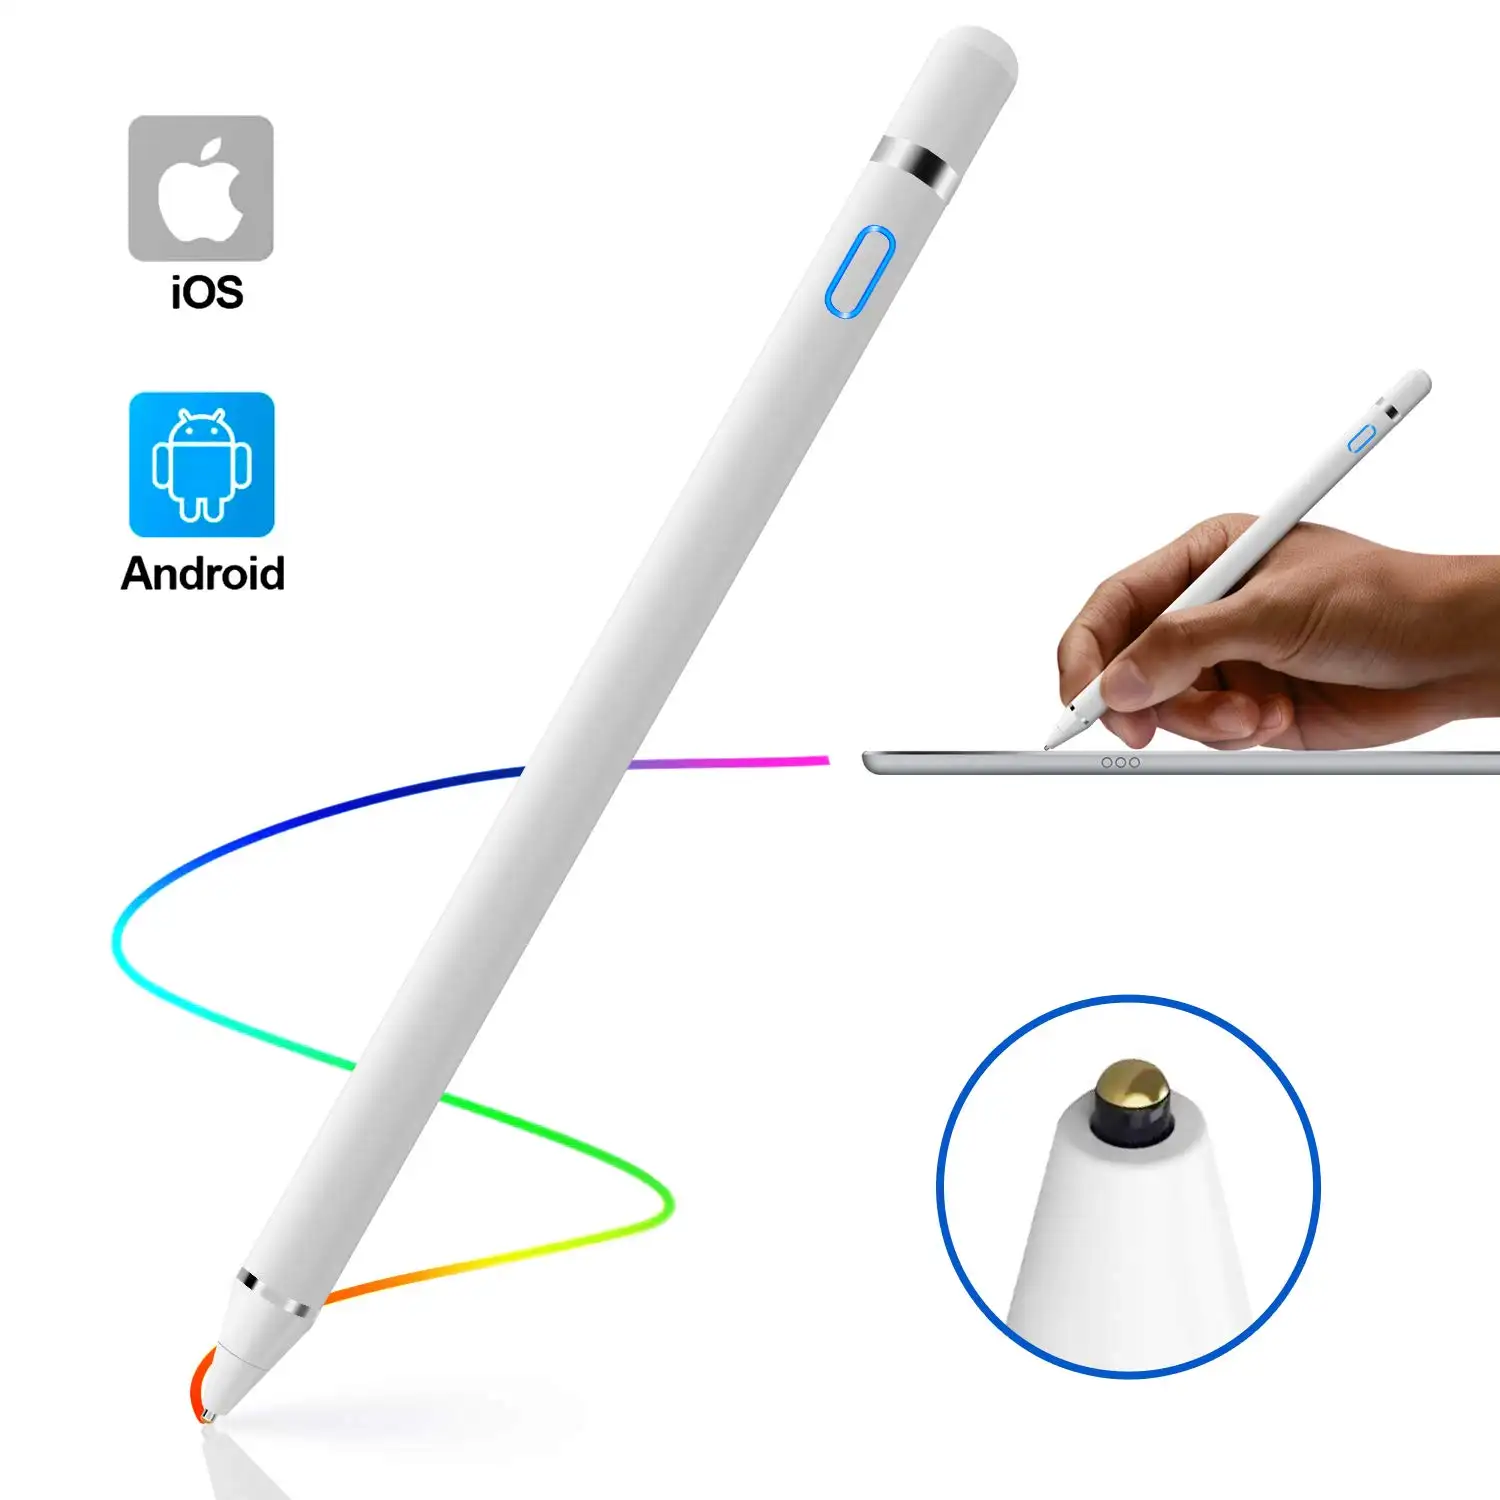 Hot sale Touch screen capacitive pencil professional drawing tablet active stylus pen for apple ipad